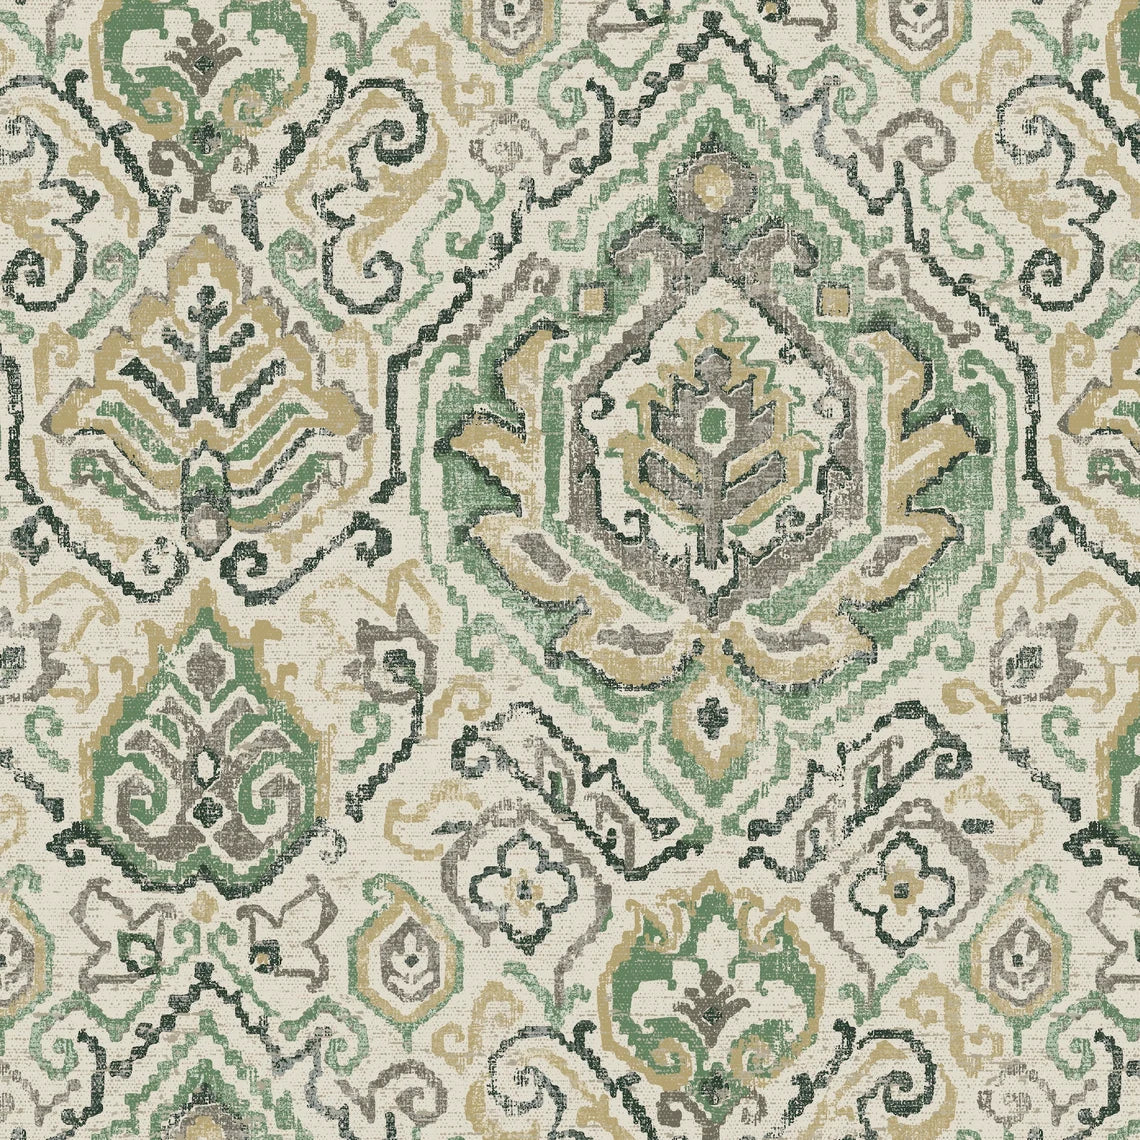 Tab Top Curtain Panels Pair in Cathell Meadow Green Medallion Weathered Persian Rug Design- Large Scale